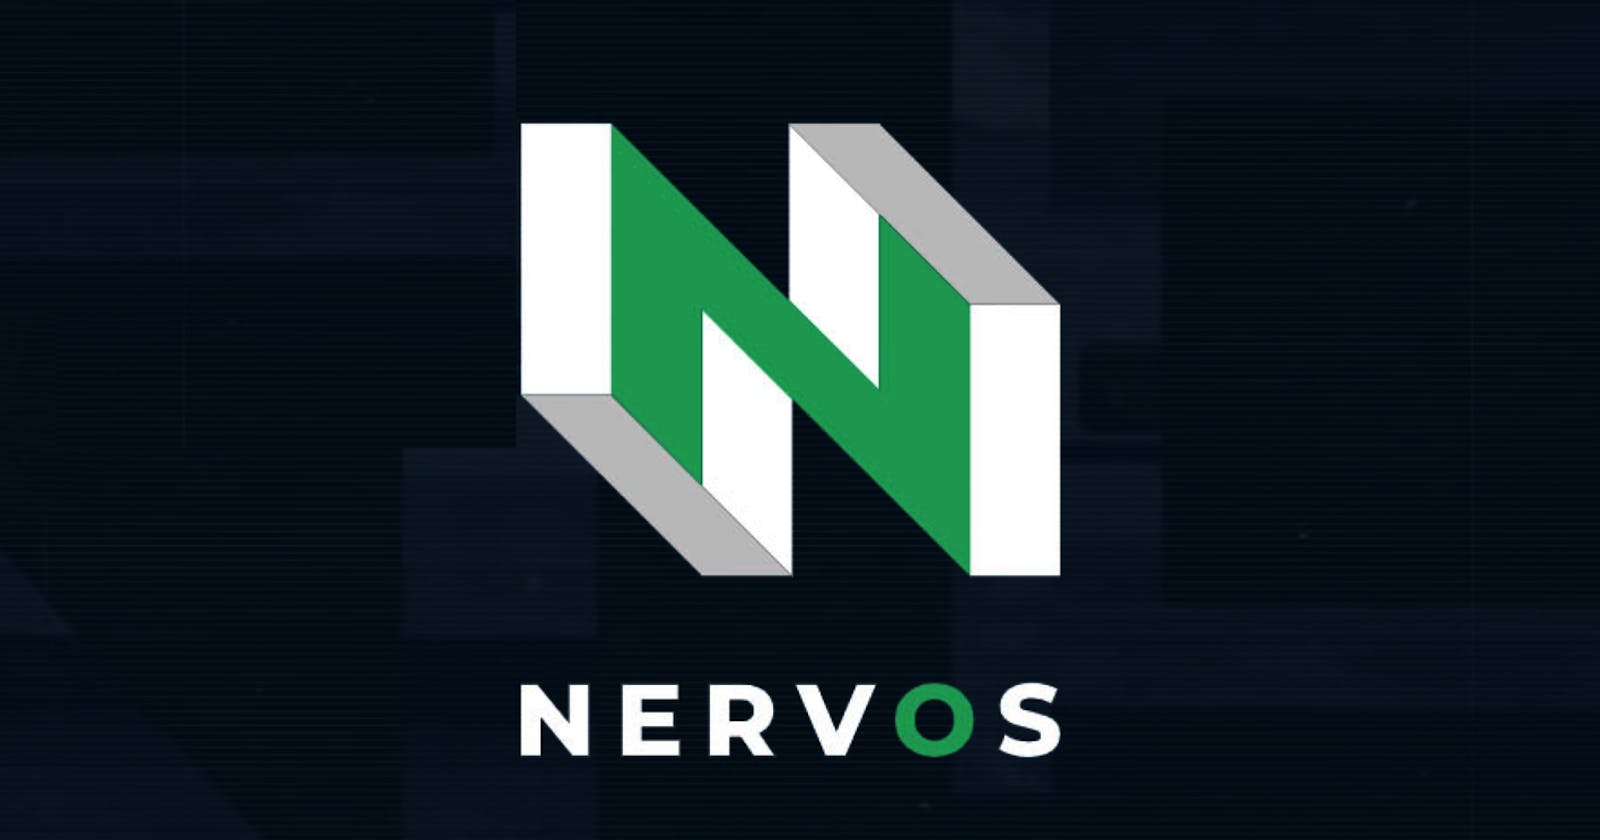 Nervos Network Is Uniquely Positioned To Accelerate Blockchain Scalability